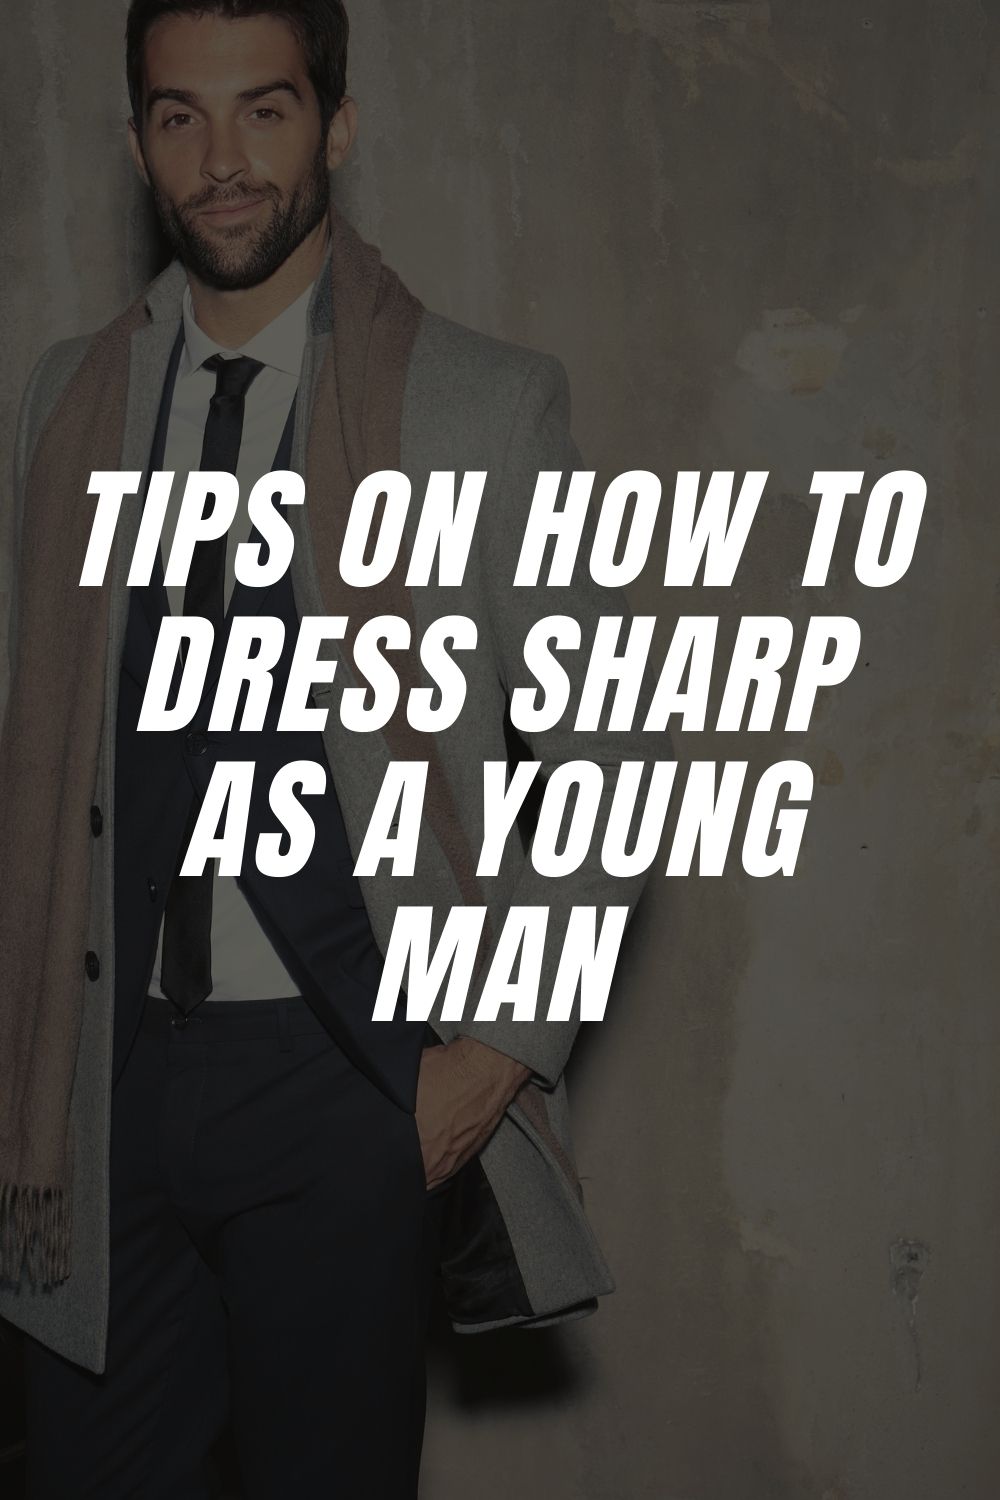 Tips on How to Dress Sharp as a Young Man